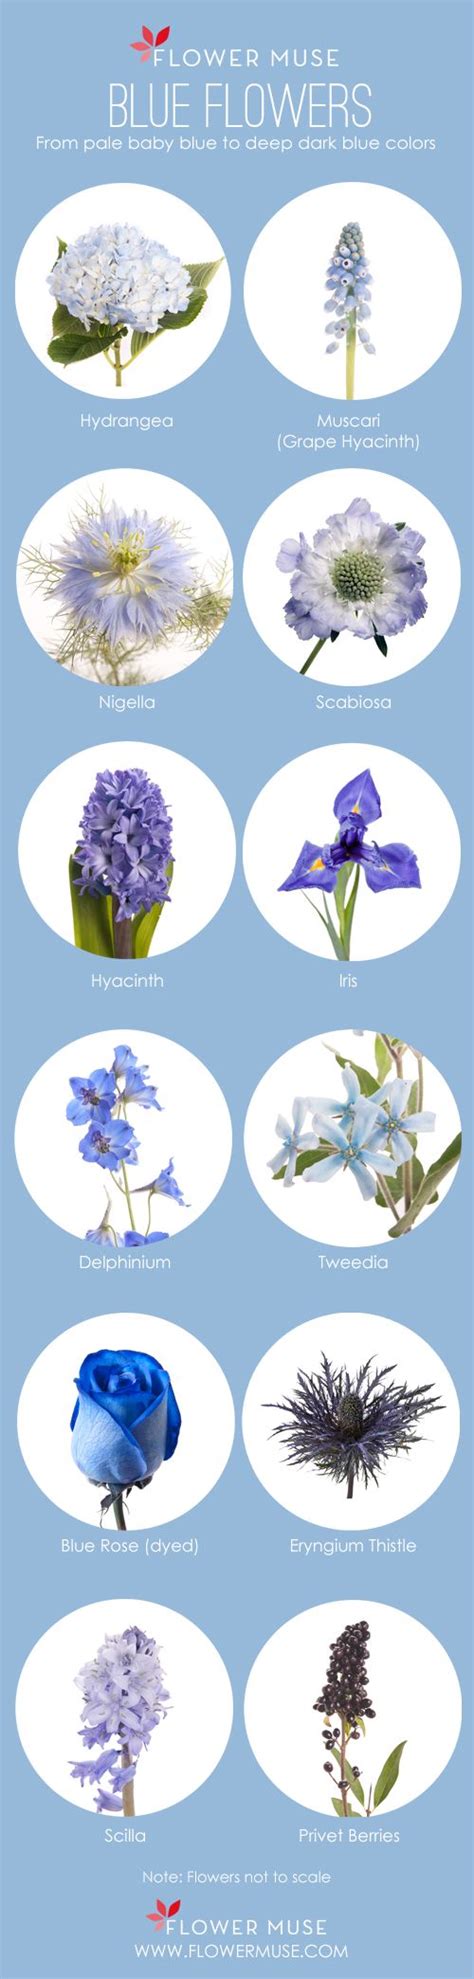 Pictures Of Blue Flowers And Their Names Picturemeta